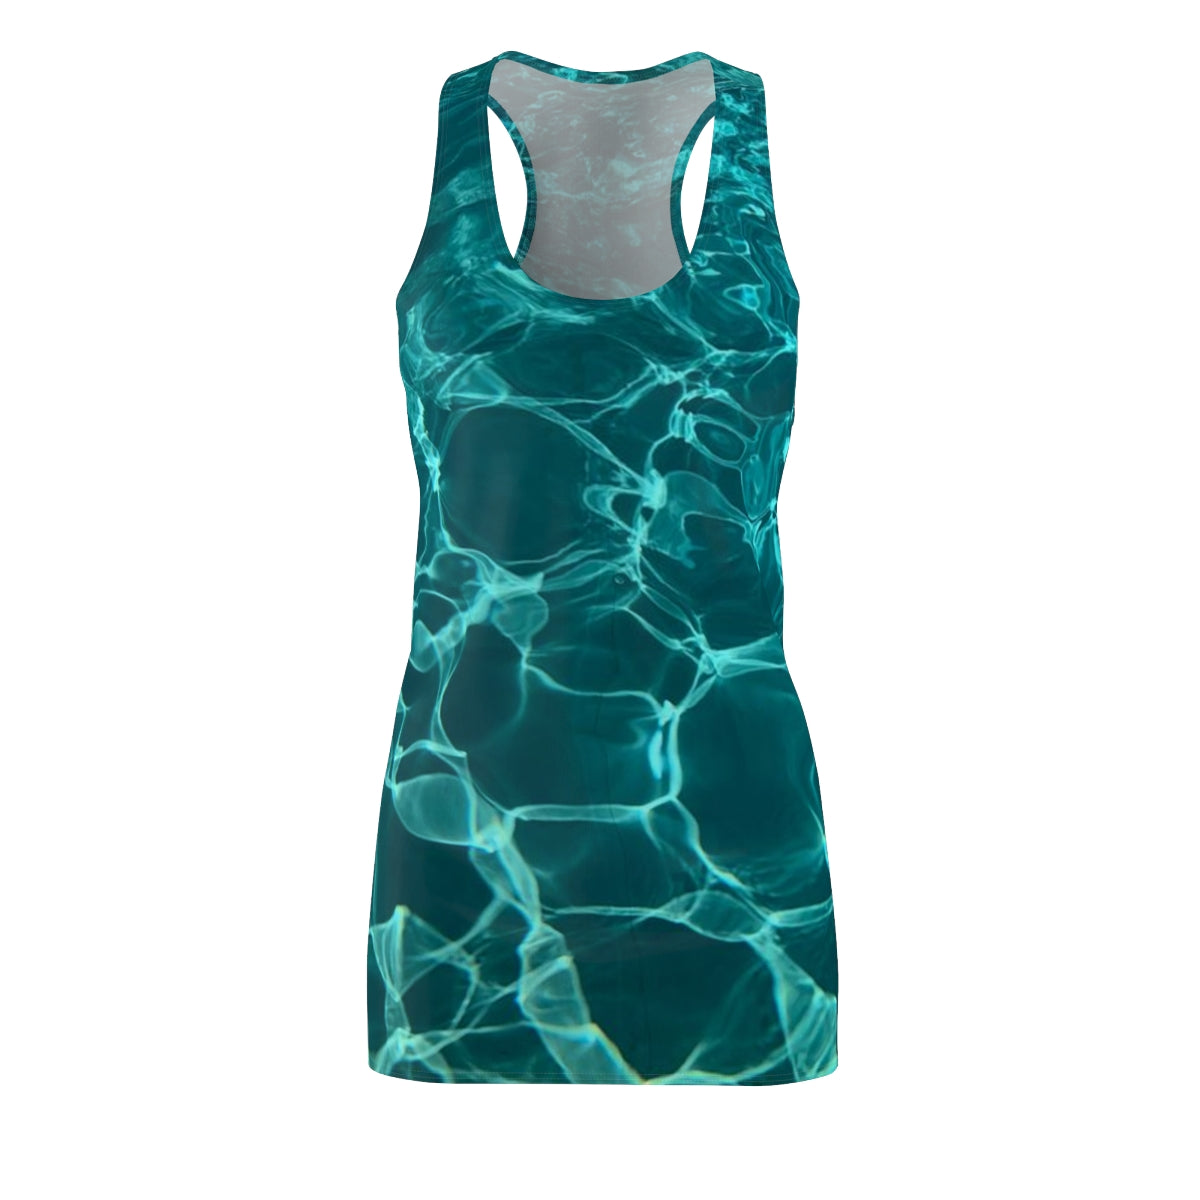 Women's Cut & Sew Racerback Dress with Turquoise color design